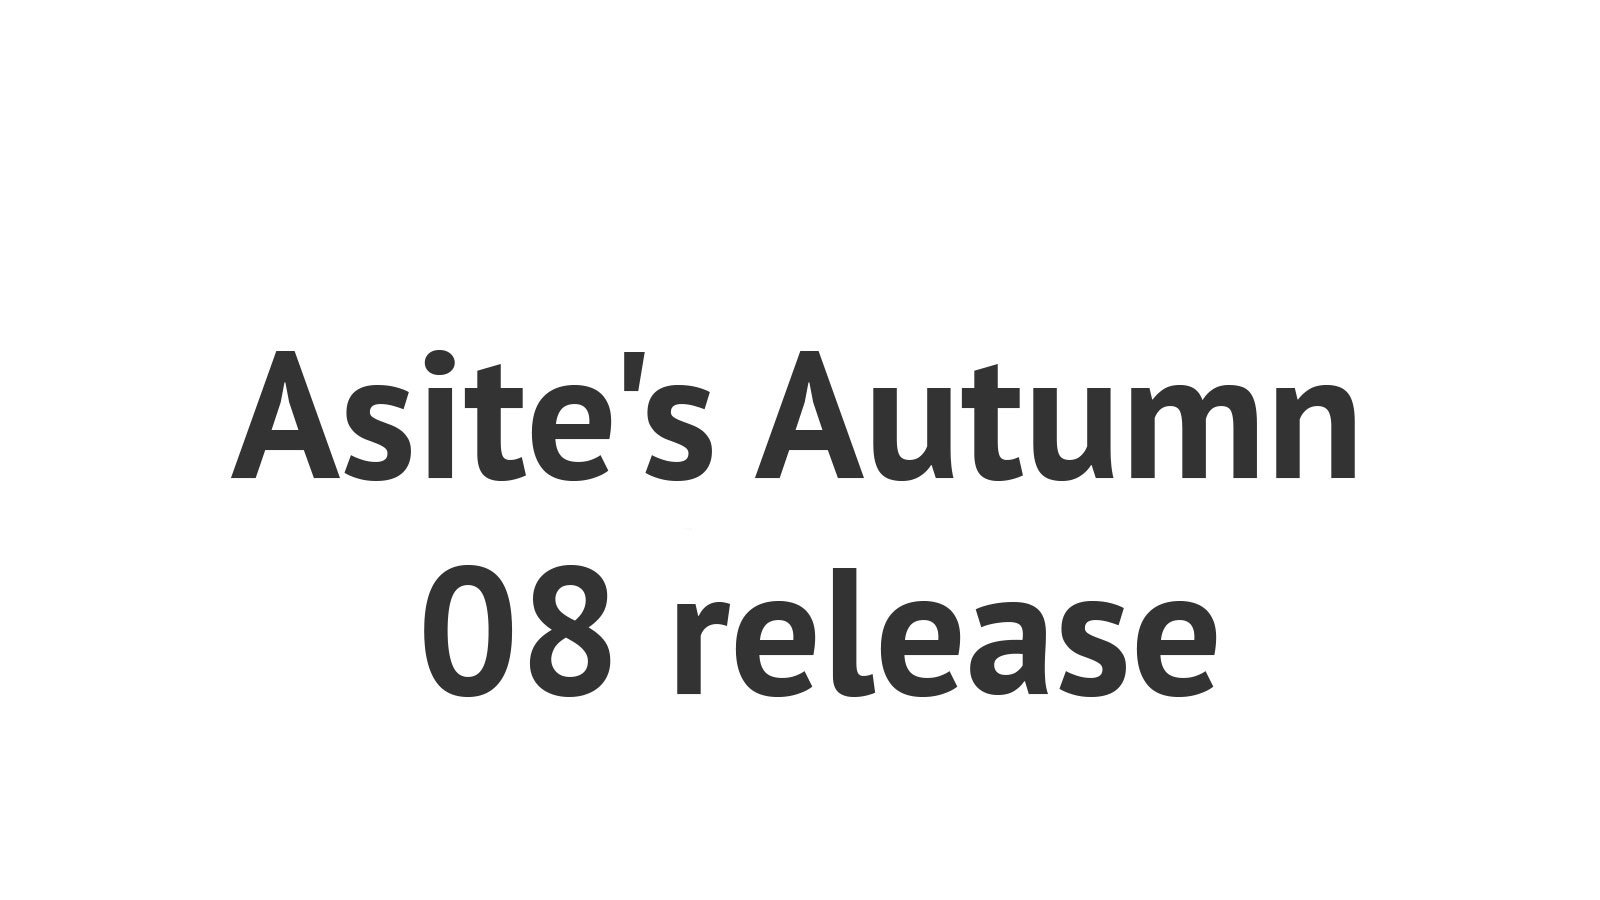 Asite's Autumn 08 release delivers eLearning and further advances in SaaS document management